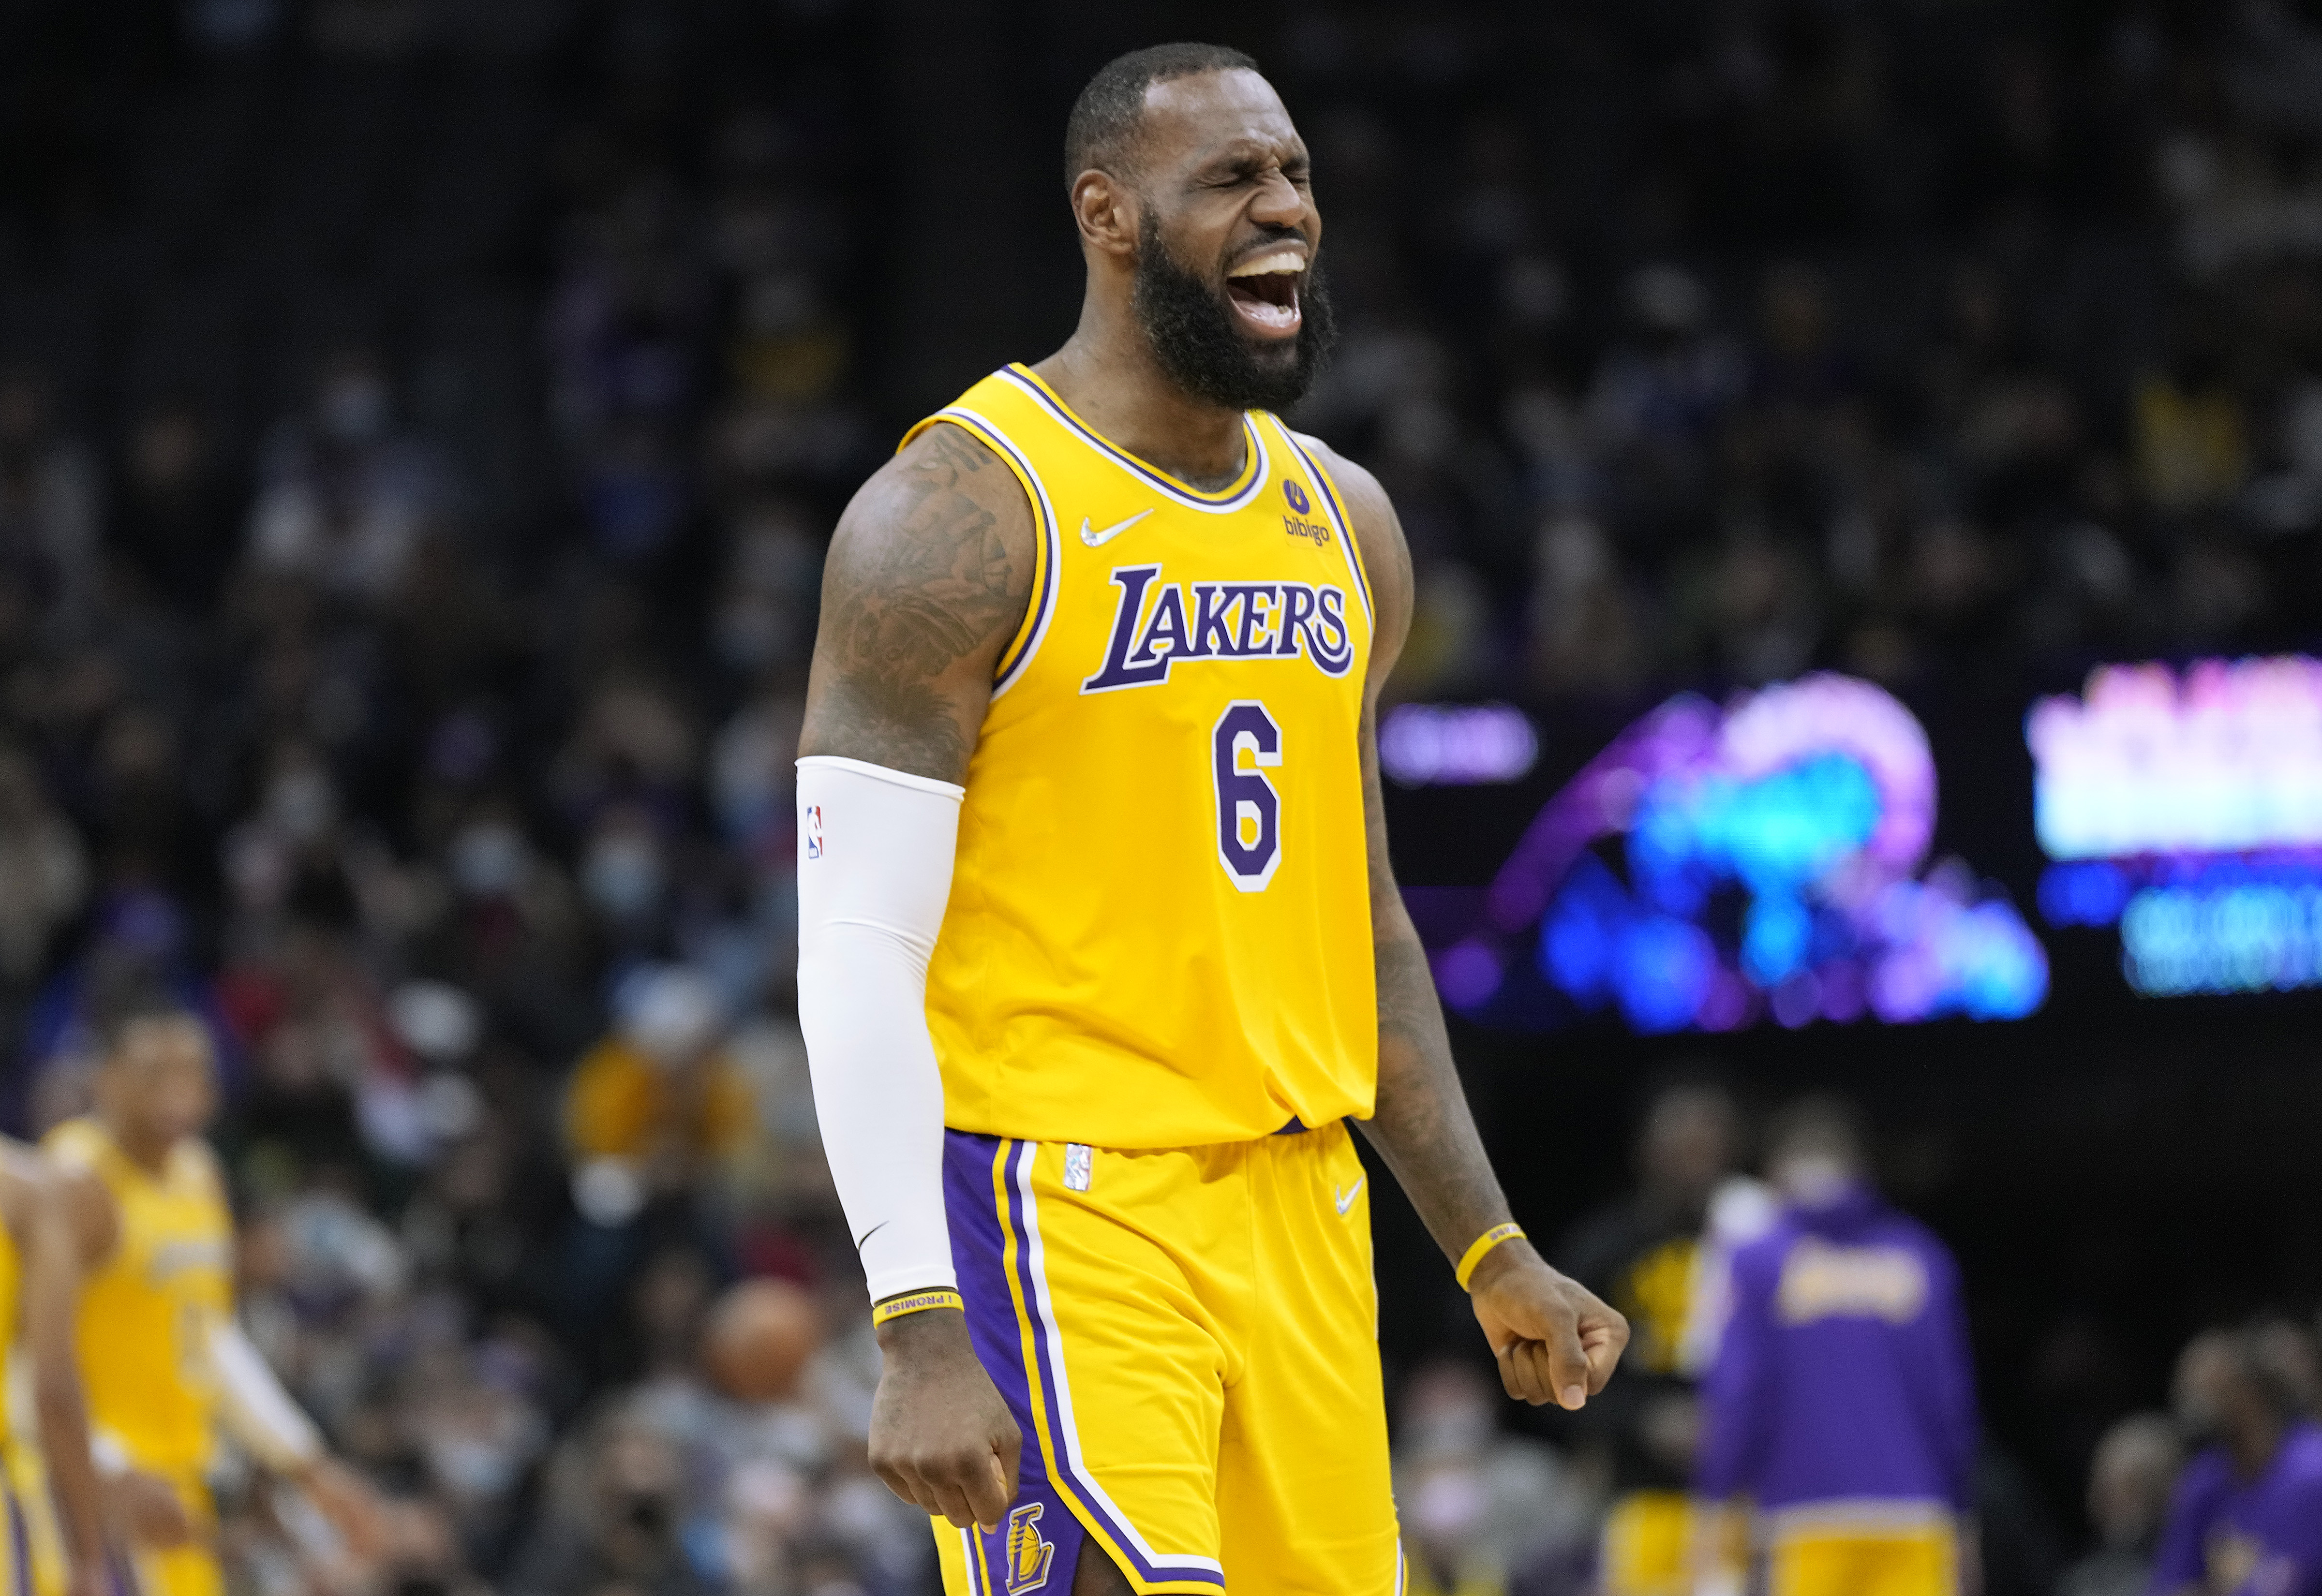 NBA All-Star Game 2022: Stephen Curry, LeBron James Lead 2nd